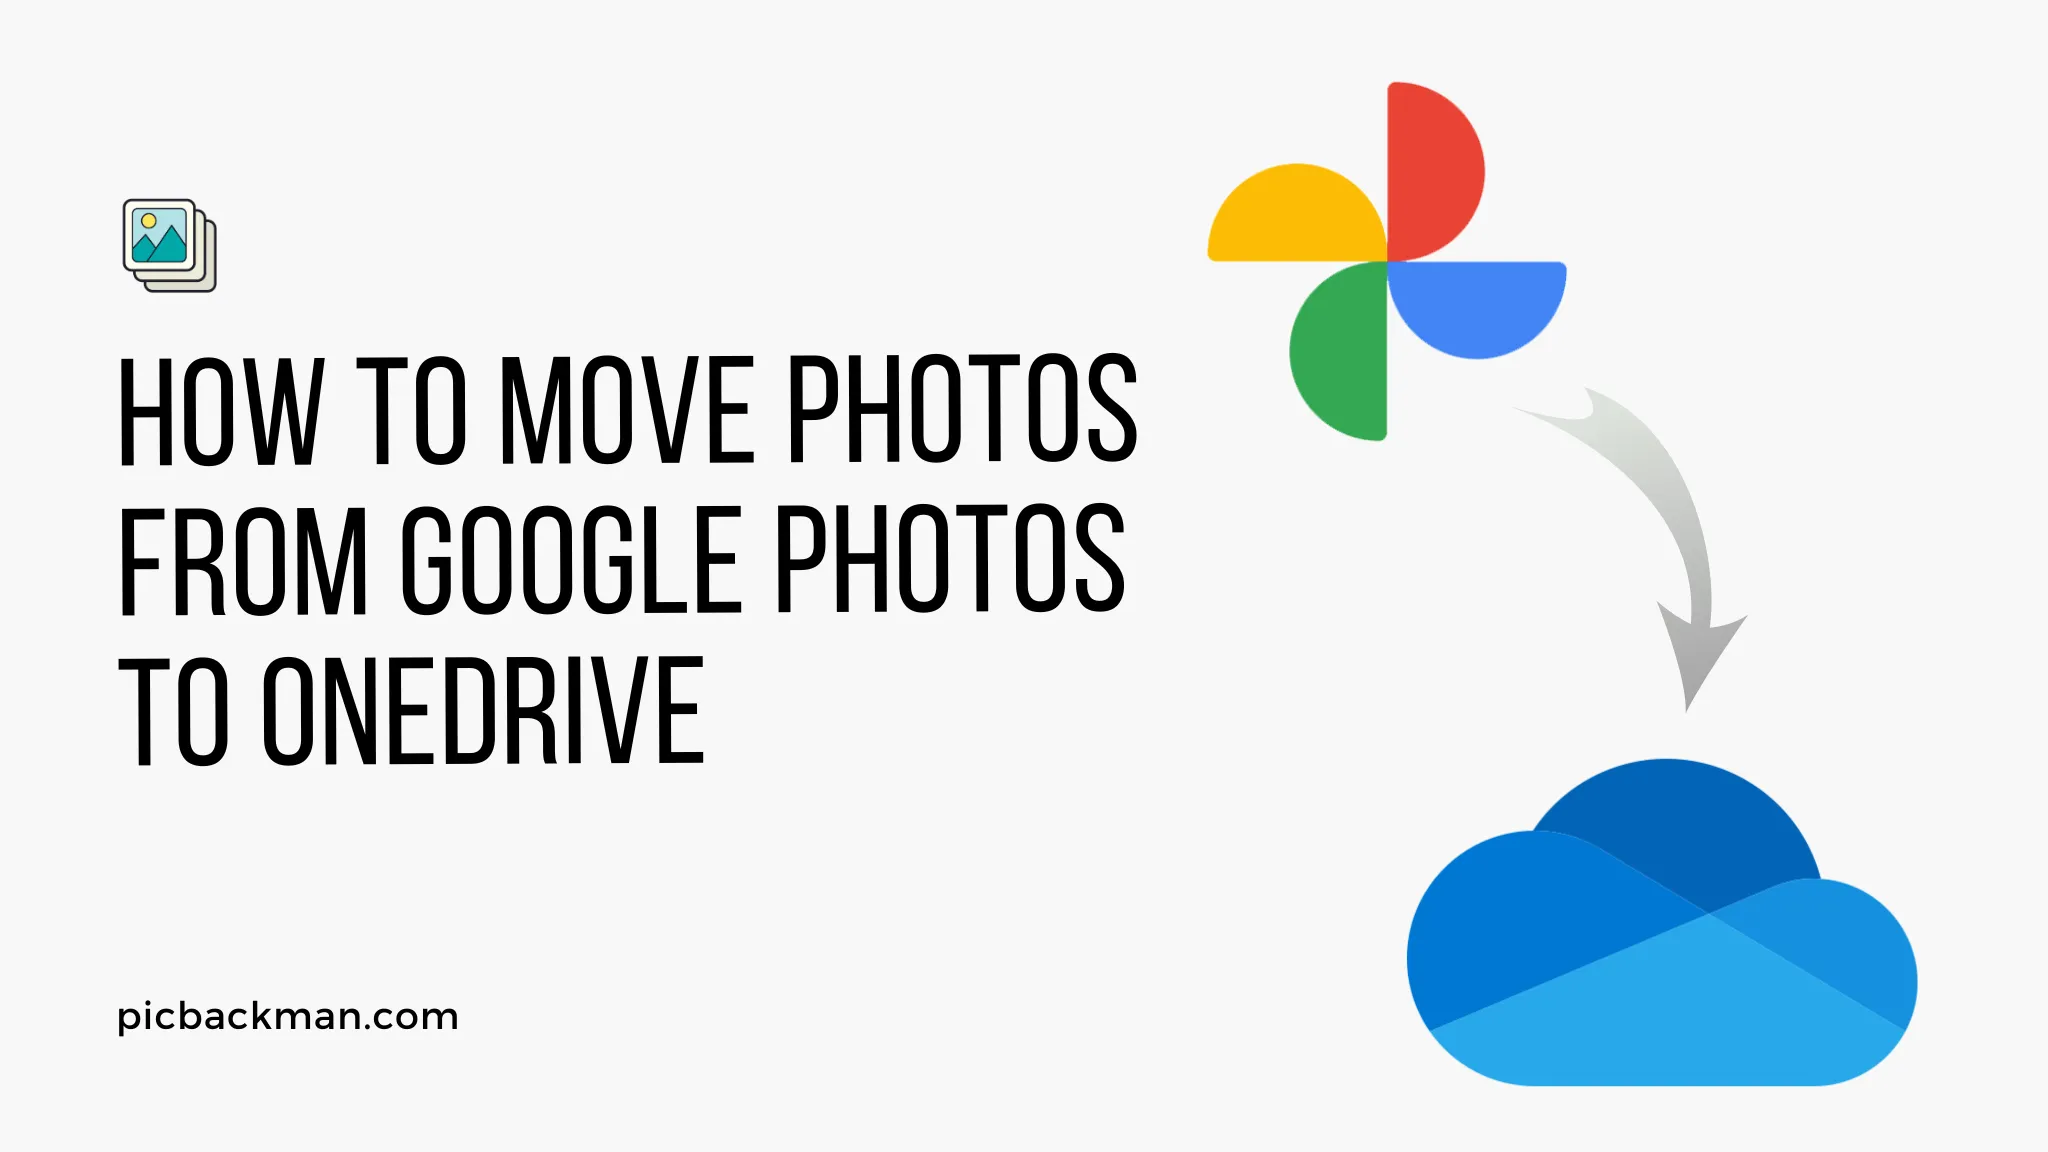 How to Move Photos from Google Photos to OneDrive?